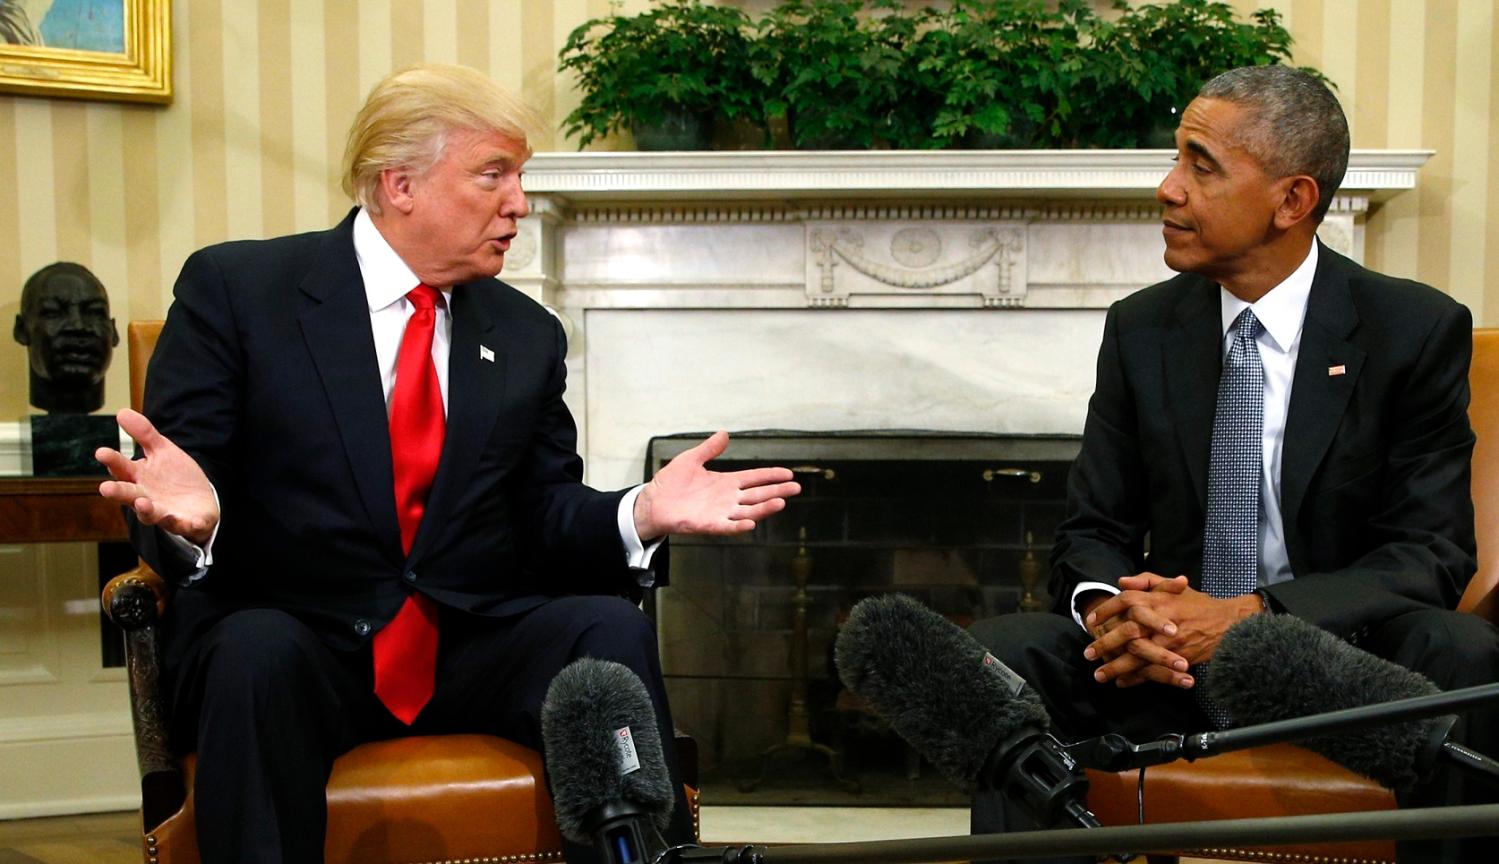 U.S. President Barack Obama meets with President-elect Donald Trump to discuss transition plans in the White House Oval Office in Washington, U.S., November 10, 2016. REUTERS/Kevin Lamarque - RTX2T2IN